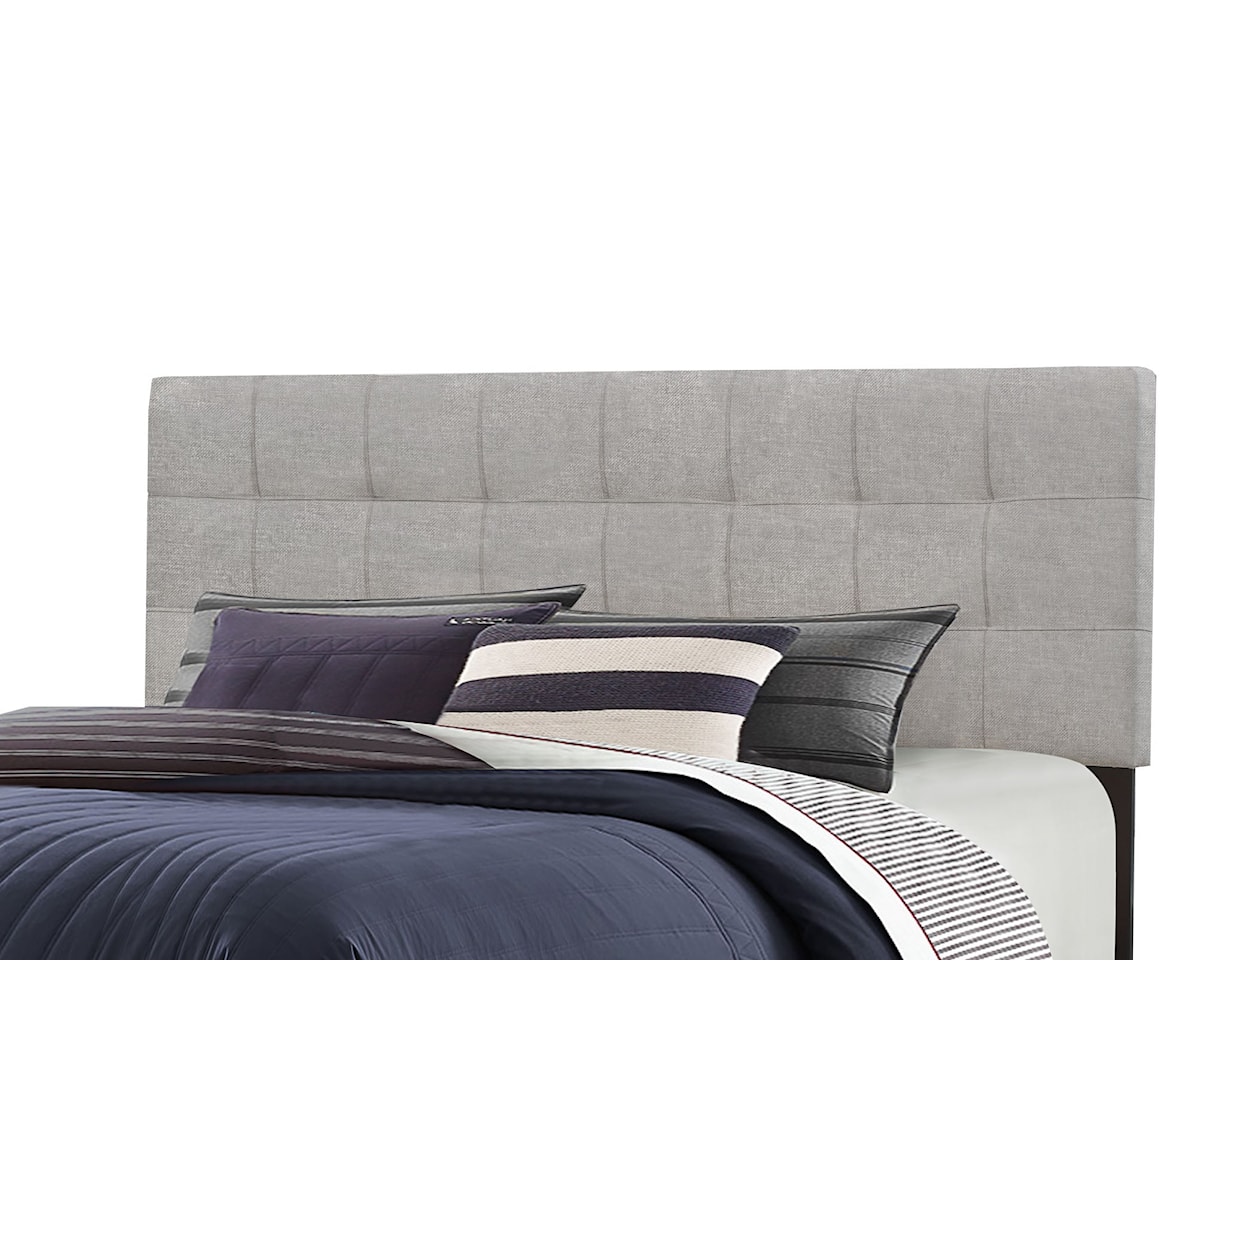 Hillsdale Delaney Full/Queen Headboard with Frame